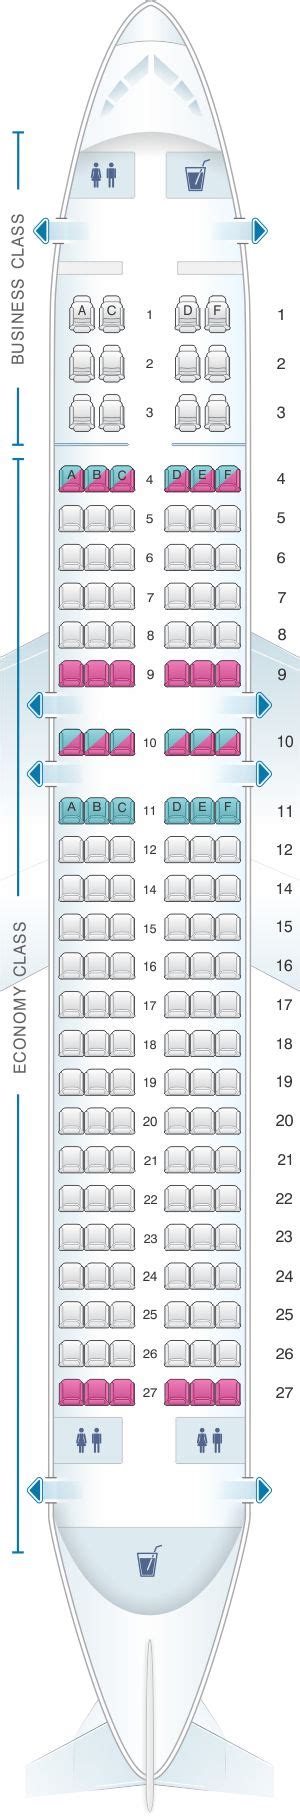 Airbus A Neo Seat Map Avianca Image To U